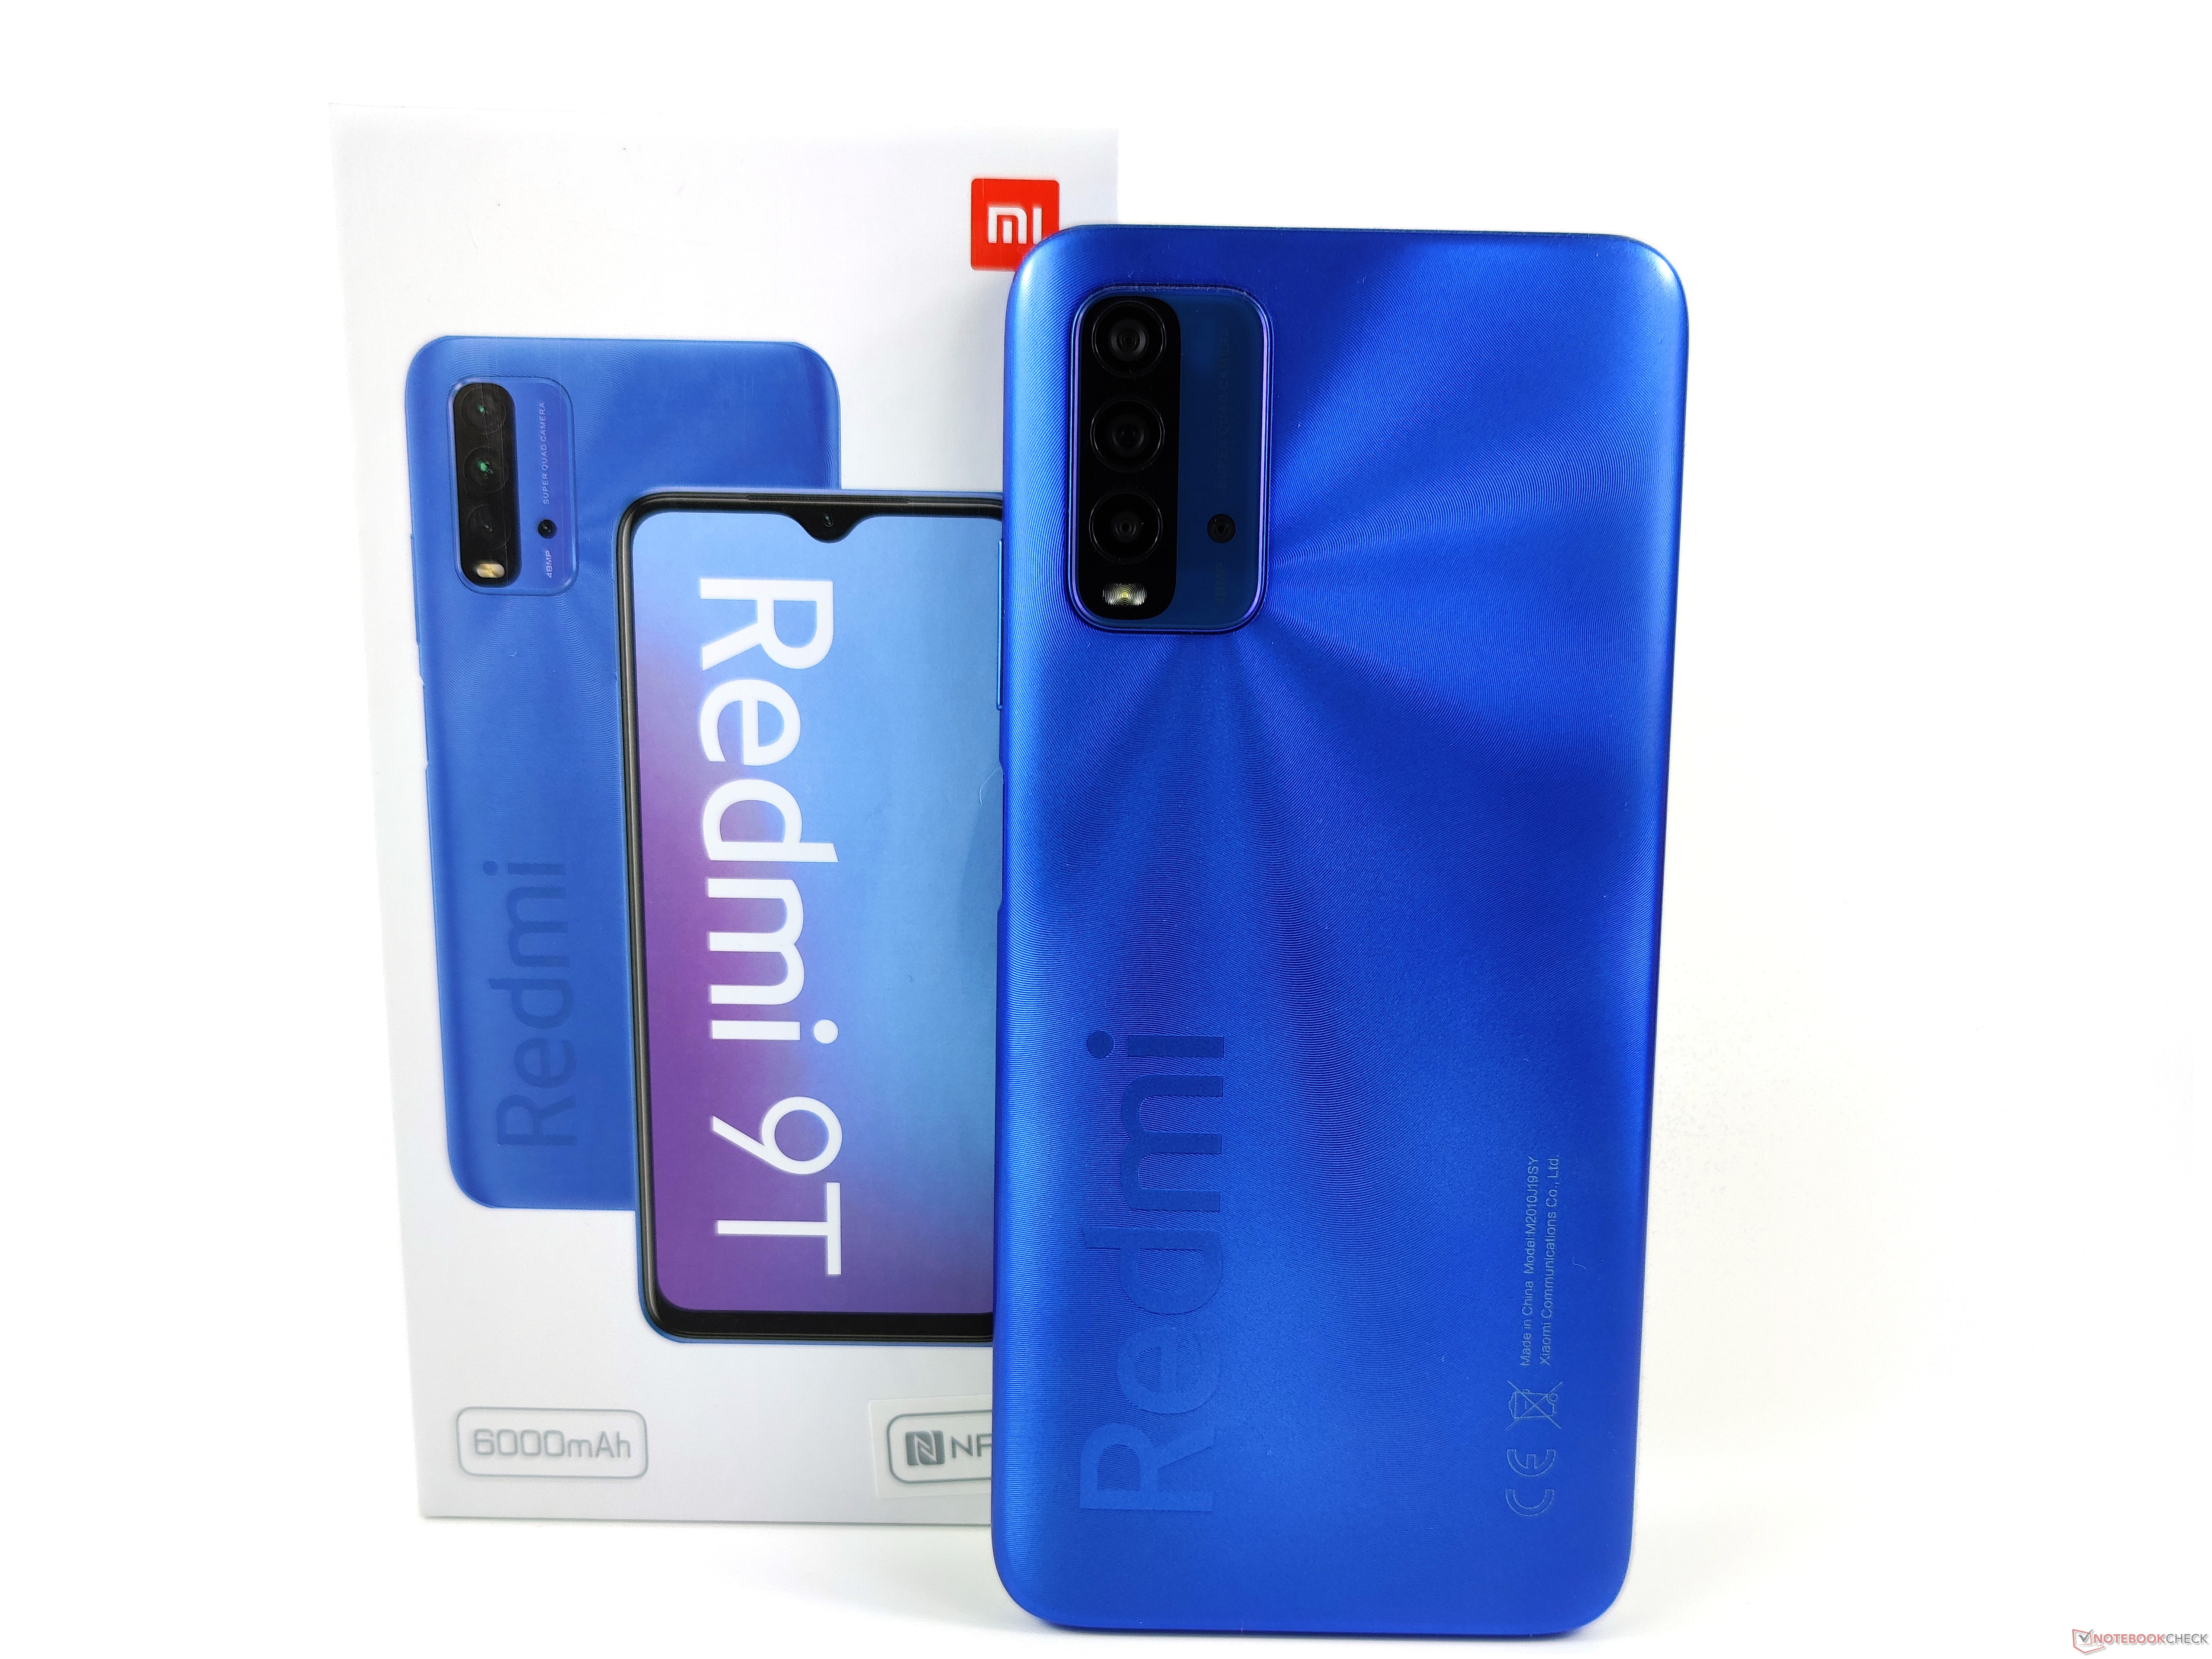 Xiaomi Redmi 9T review: Entry-level smartphone with huge battery, NFC, and stereo sound